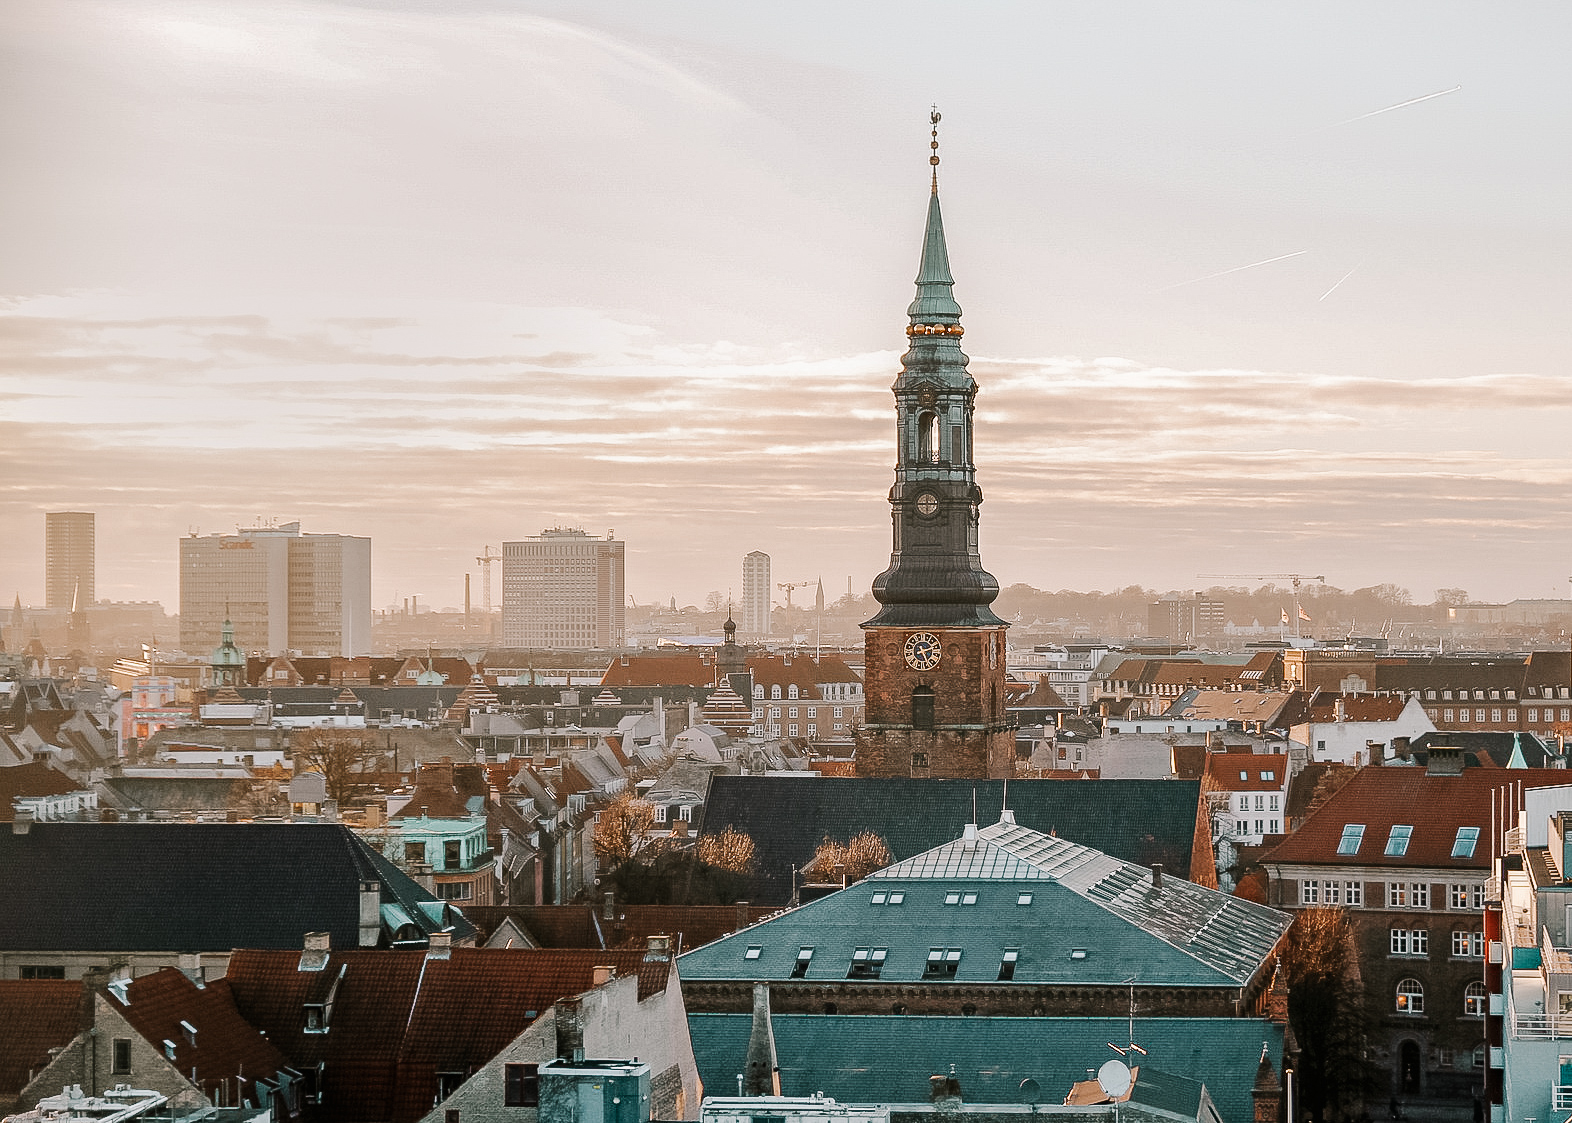 A view of Copenhagen from above, with a view of the church in the foreground and many roofs below, during morning